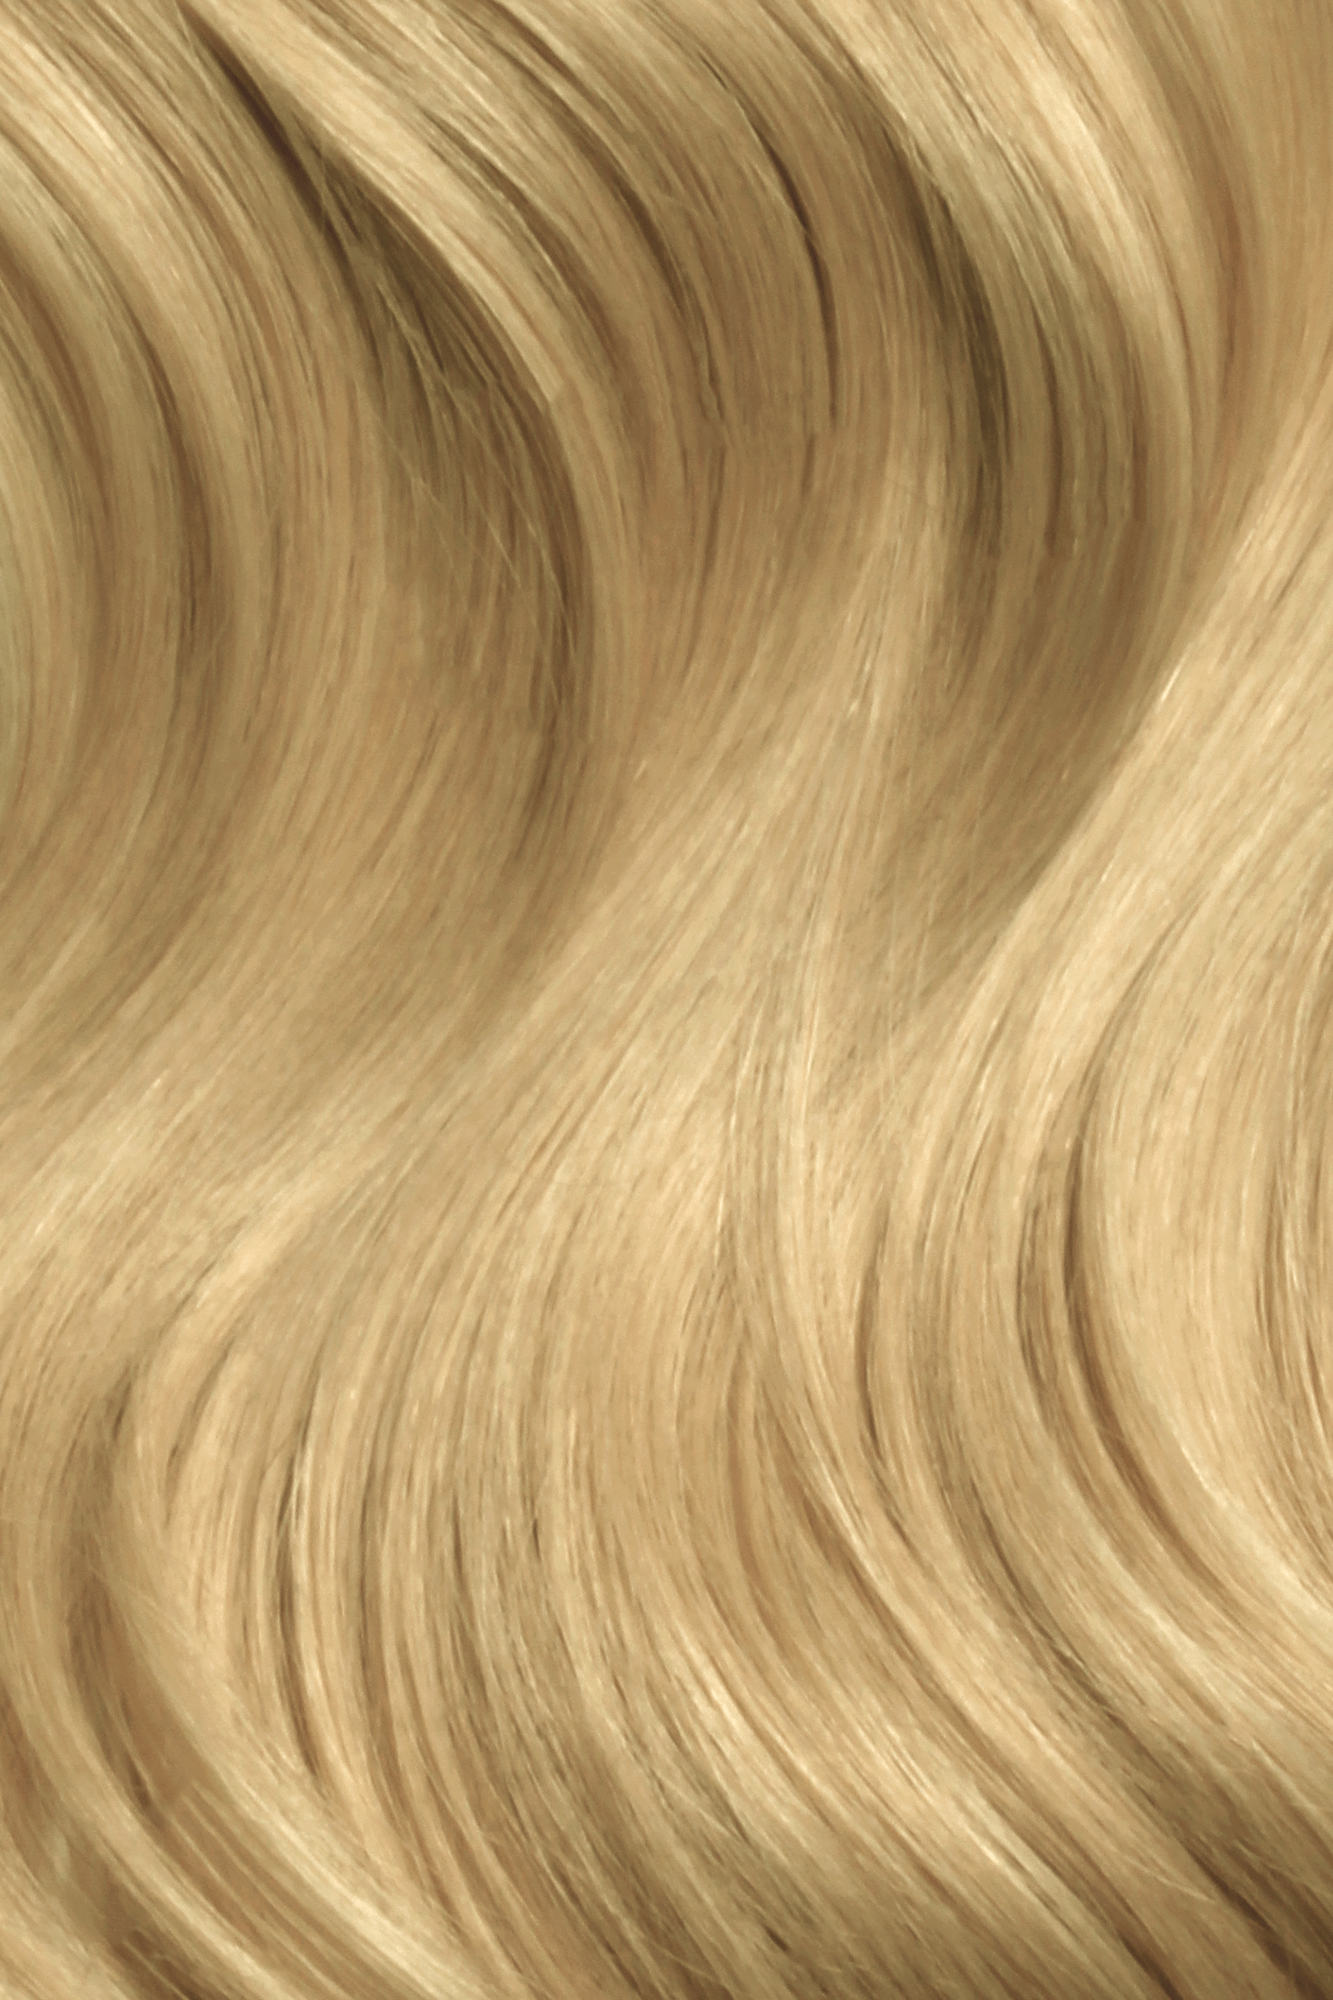 SEAMLESS® Tapes 16 Inches - SWAY Hair Extensions Hollywood-Blonde-18-613 clip-in hair extensions made of 100% Double Drawn, Remy Human Hair. SWAY SEAMLESS® Tapes, 16 inches. Lightweight, flexible, and perfect for any hairstyle.